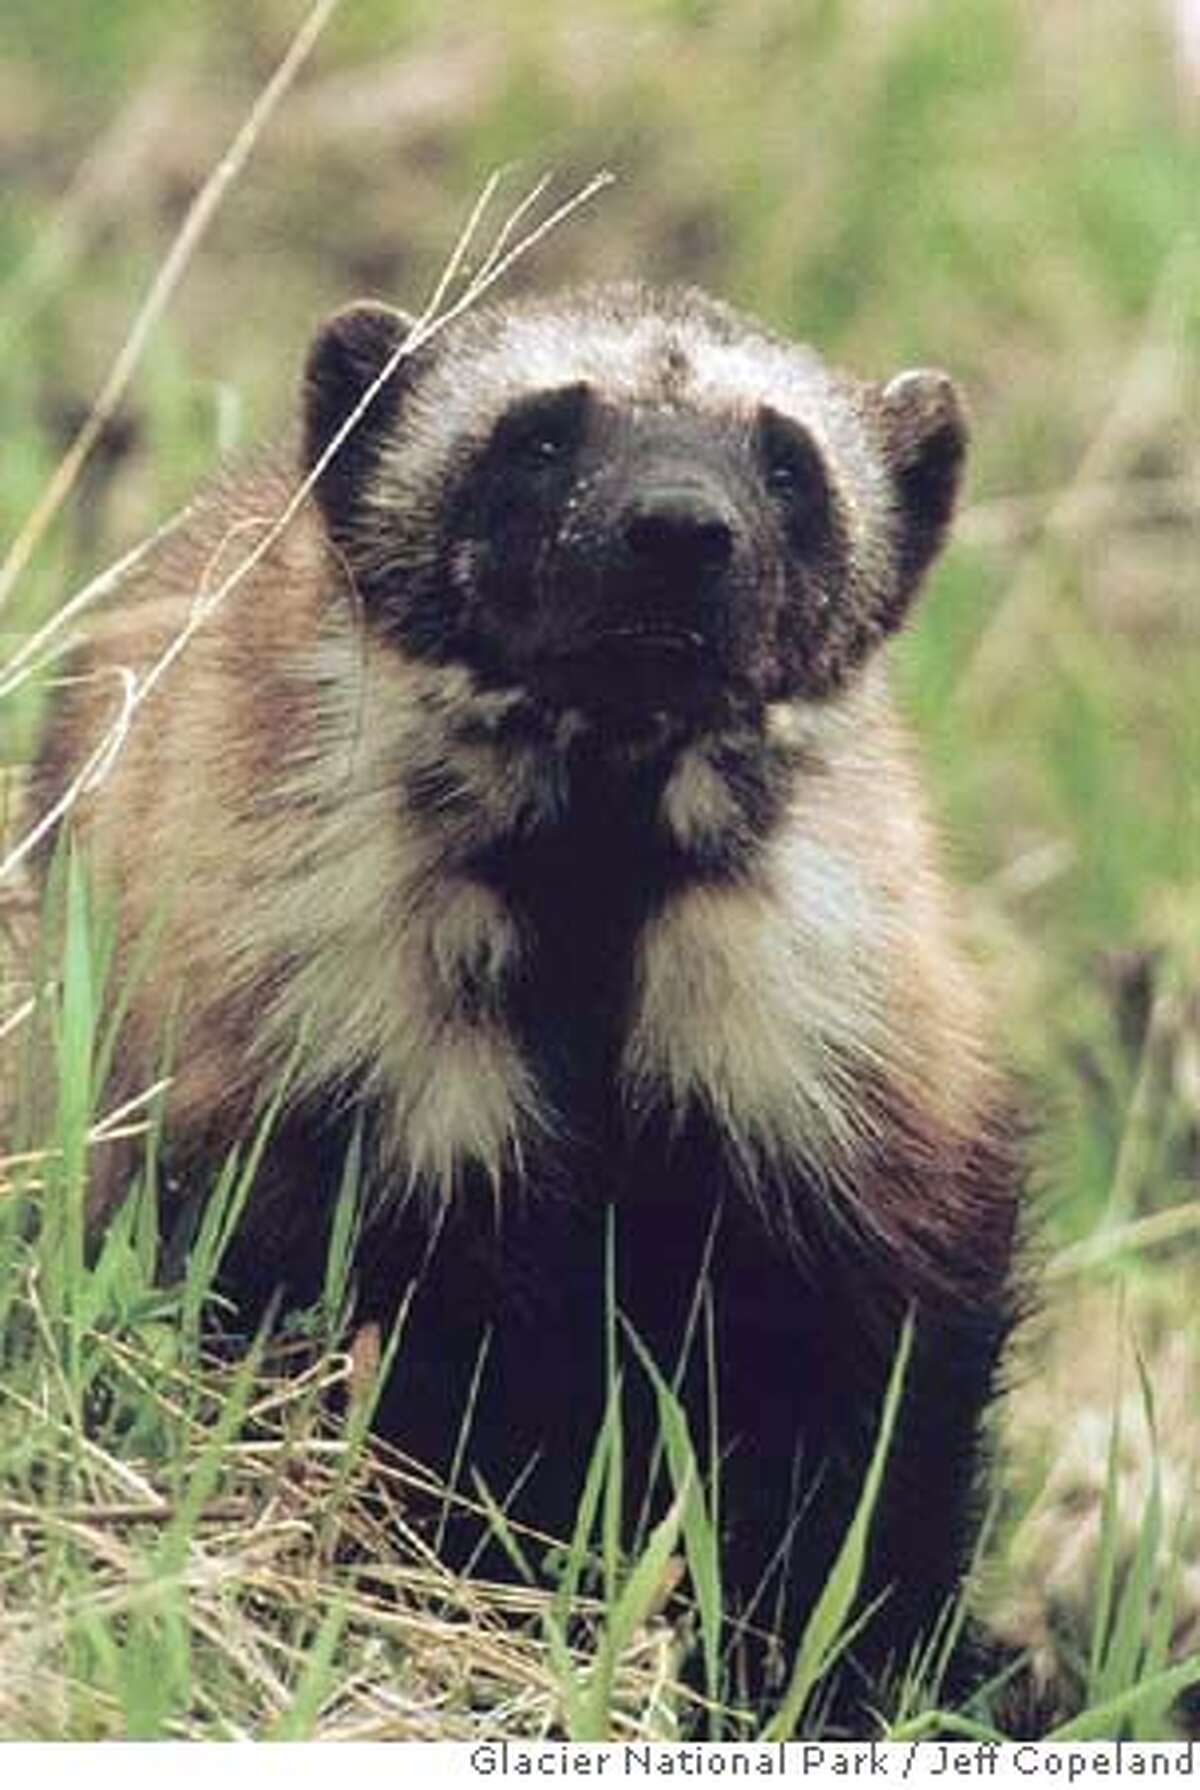 ###Live Caption:This undated photo shows a wolverine in Glacier National Park in Montana, taken by biologist Jeff Copeland. (AP Photo/Glacier National Park, Jeff Copeland, via The Missoulian) ** NO SALES **Ran on: 02-05-2006 The wolverine may not be a solitary scavenger after all, according to the latest research.###Caption History:** ADVANCE FOR THE WEEKEND, JAN. 4-5 ** This undated photo shows a wolverine in Glacier National Park in Montana, taken by biologist Jeff Copeland. (AP Photo/Glacier National Park, Jeff Copeland, via The Missoulian) ** NO SALES **Ran on: 02-05-2006 The wolverine may not be a solitary scavenger after all, according to the latest research.###Notes:###Special Instructions:ADVANCE FOR THE WEEKEND, JAN. 4-5, IMAGE PROVIDED BY JEFF COPELAND, NO SALES